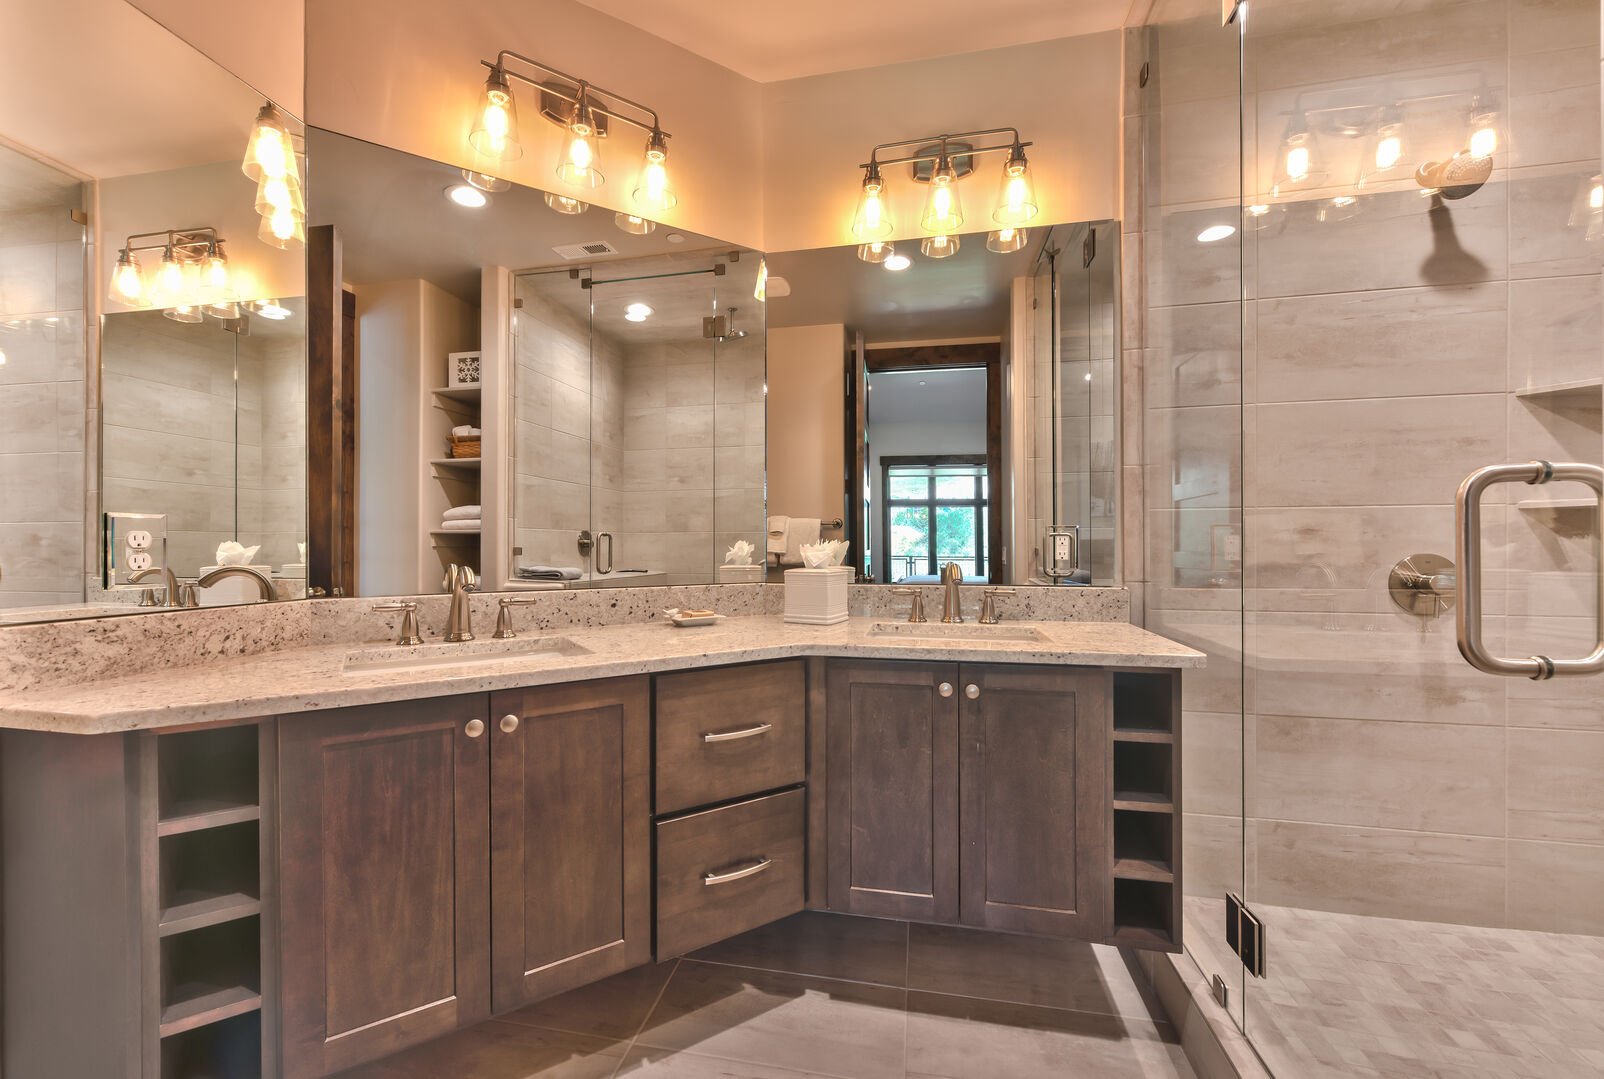 Bathrooms feature dual bowls, natural stone